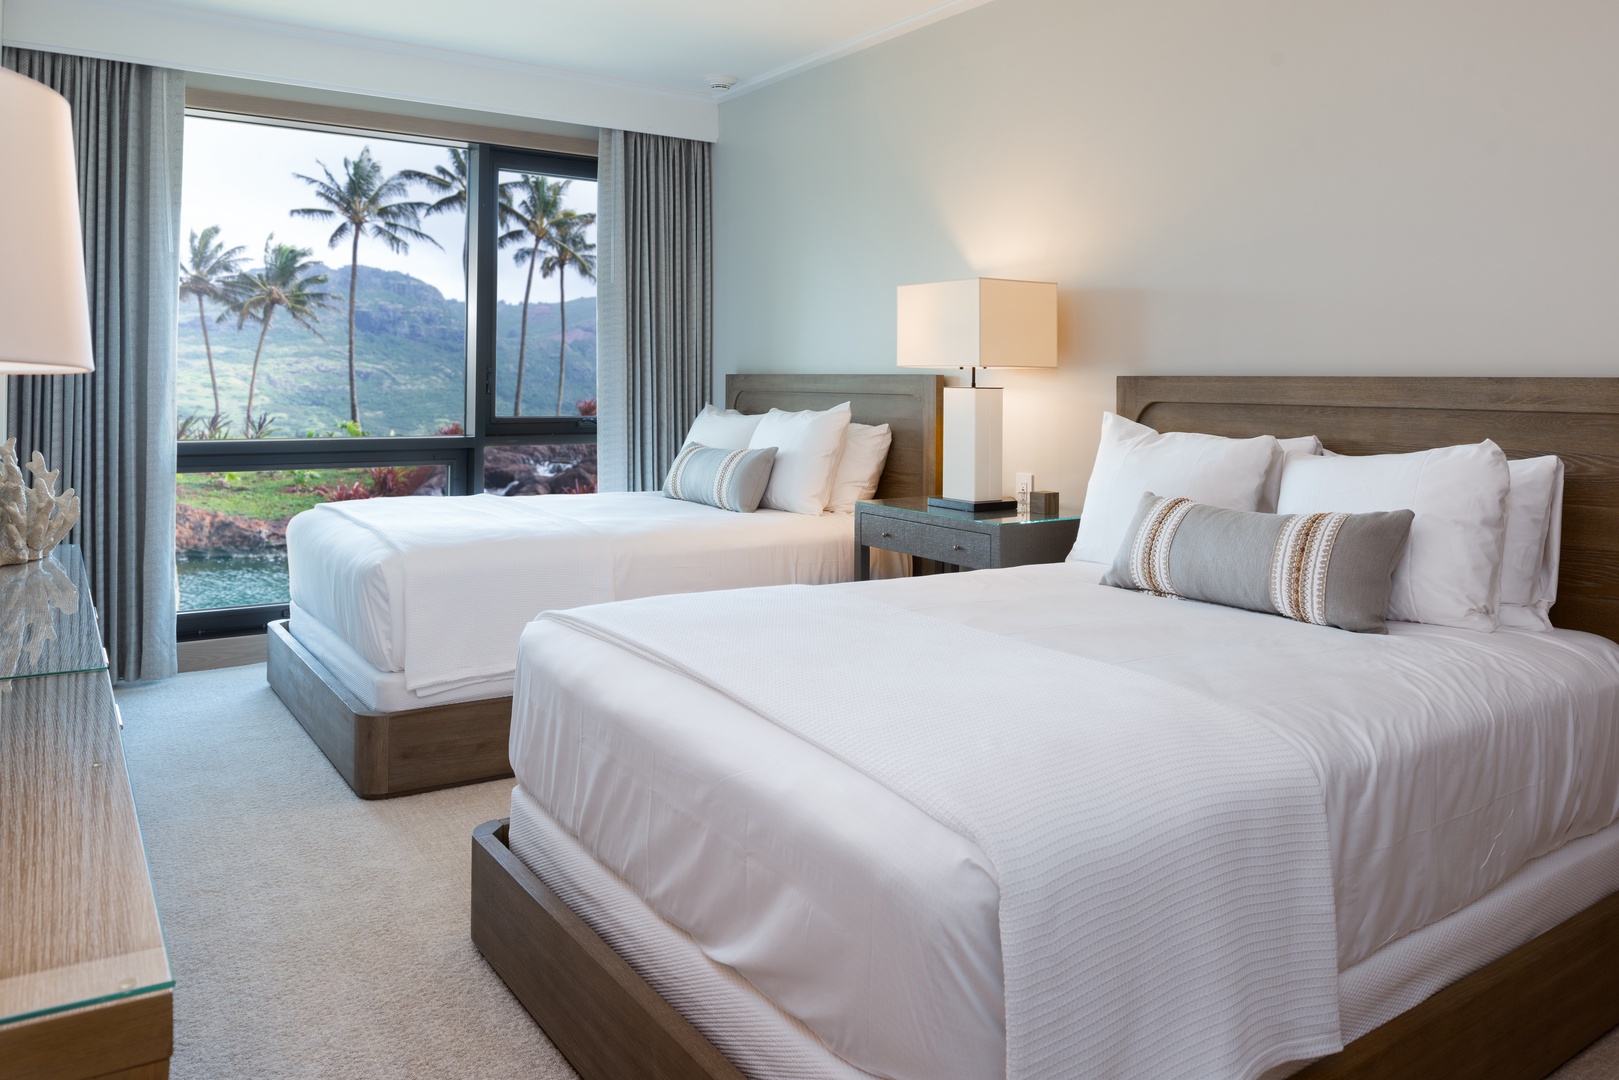 Lihue Vacation Rentals, Maliula at Hokuala 3BR Premiere* - The third bedroom provides the flexibility of two queen beds.